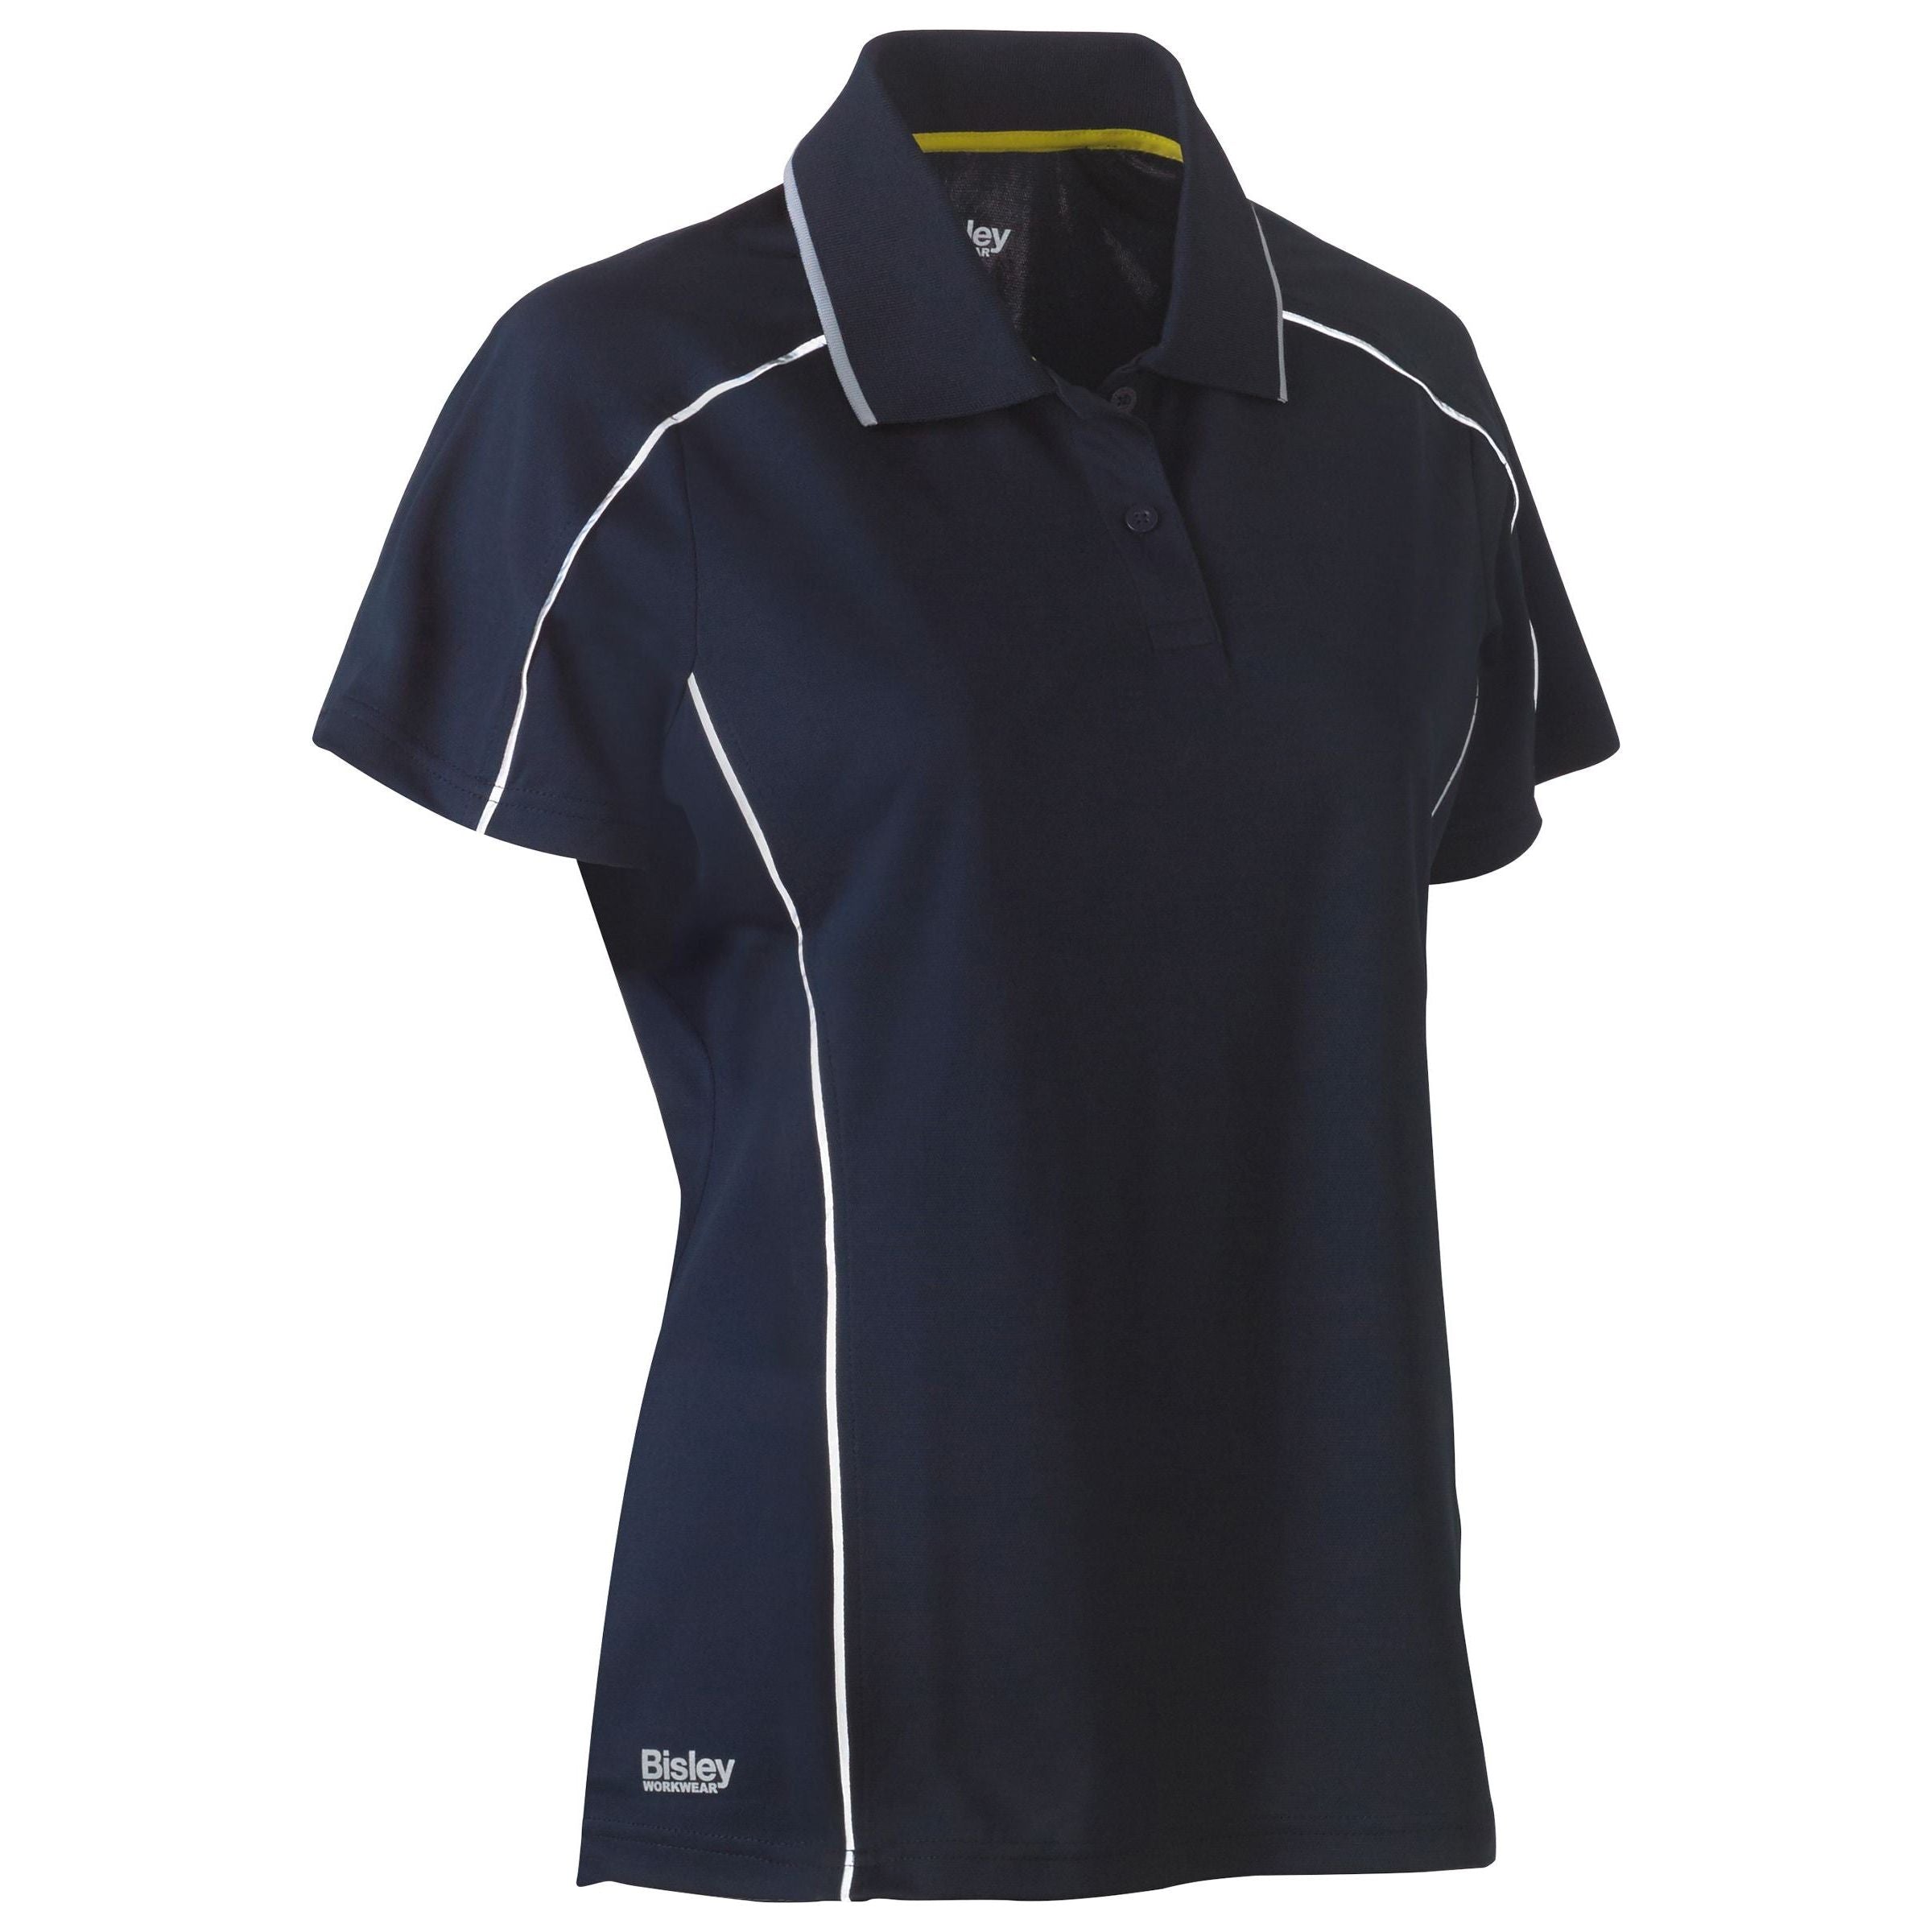 Womens Cool Mesh Polo with Reflective Piping - BKL1425